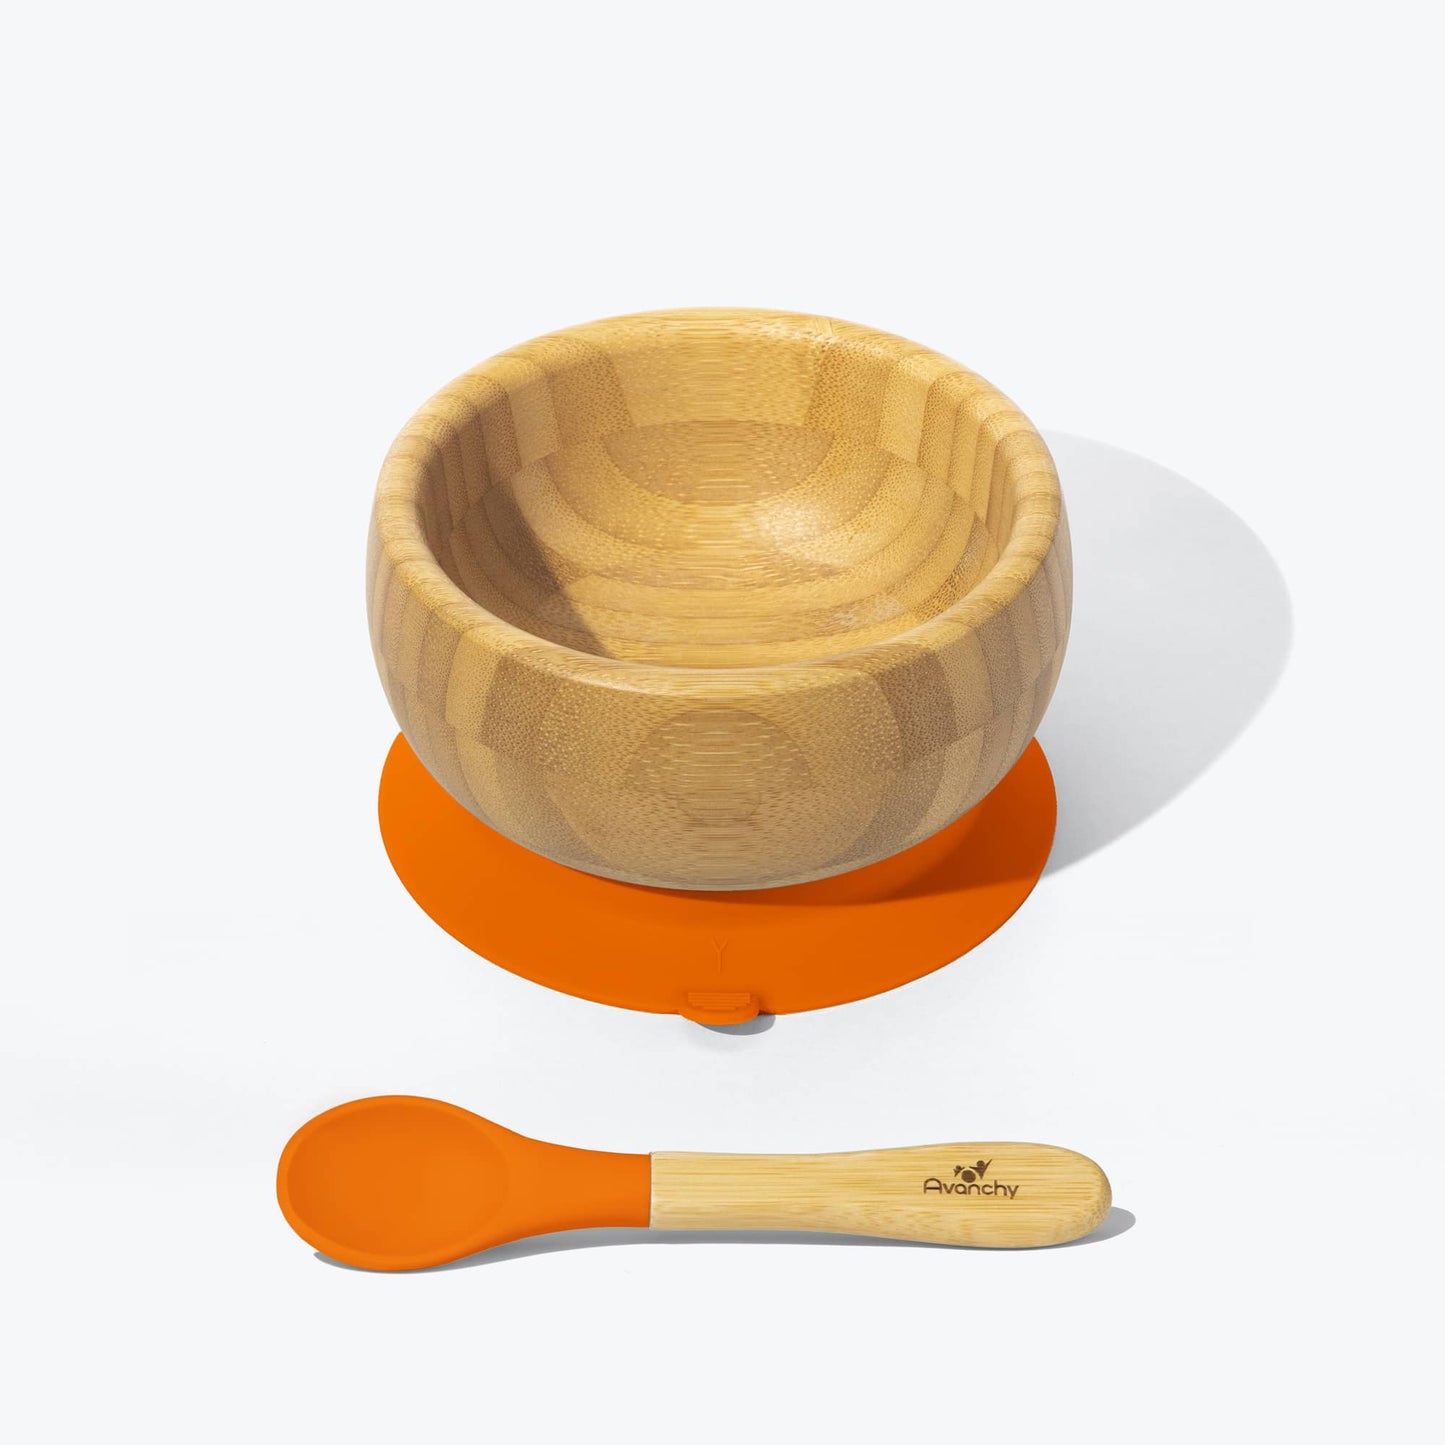 Avanchy Bamboo Suction Bowl and Spoon